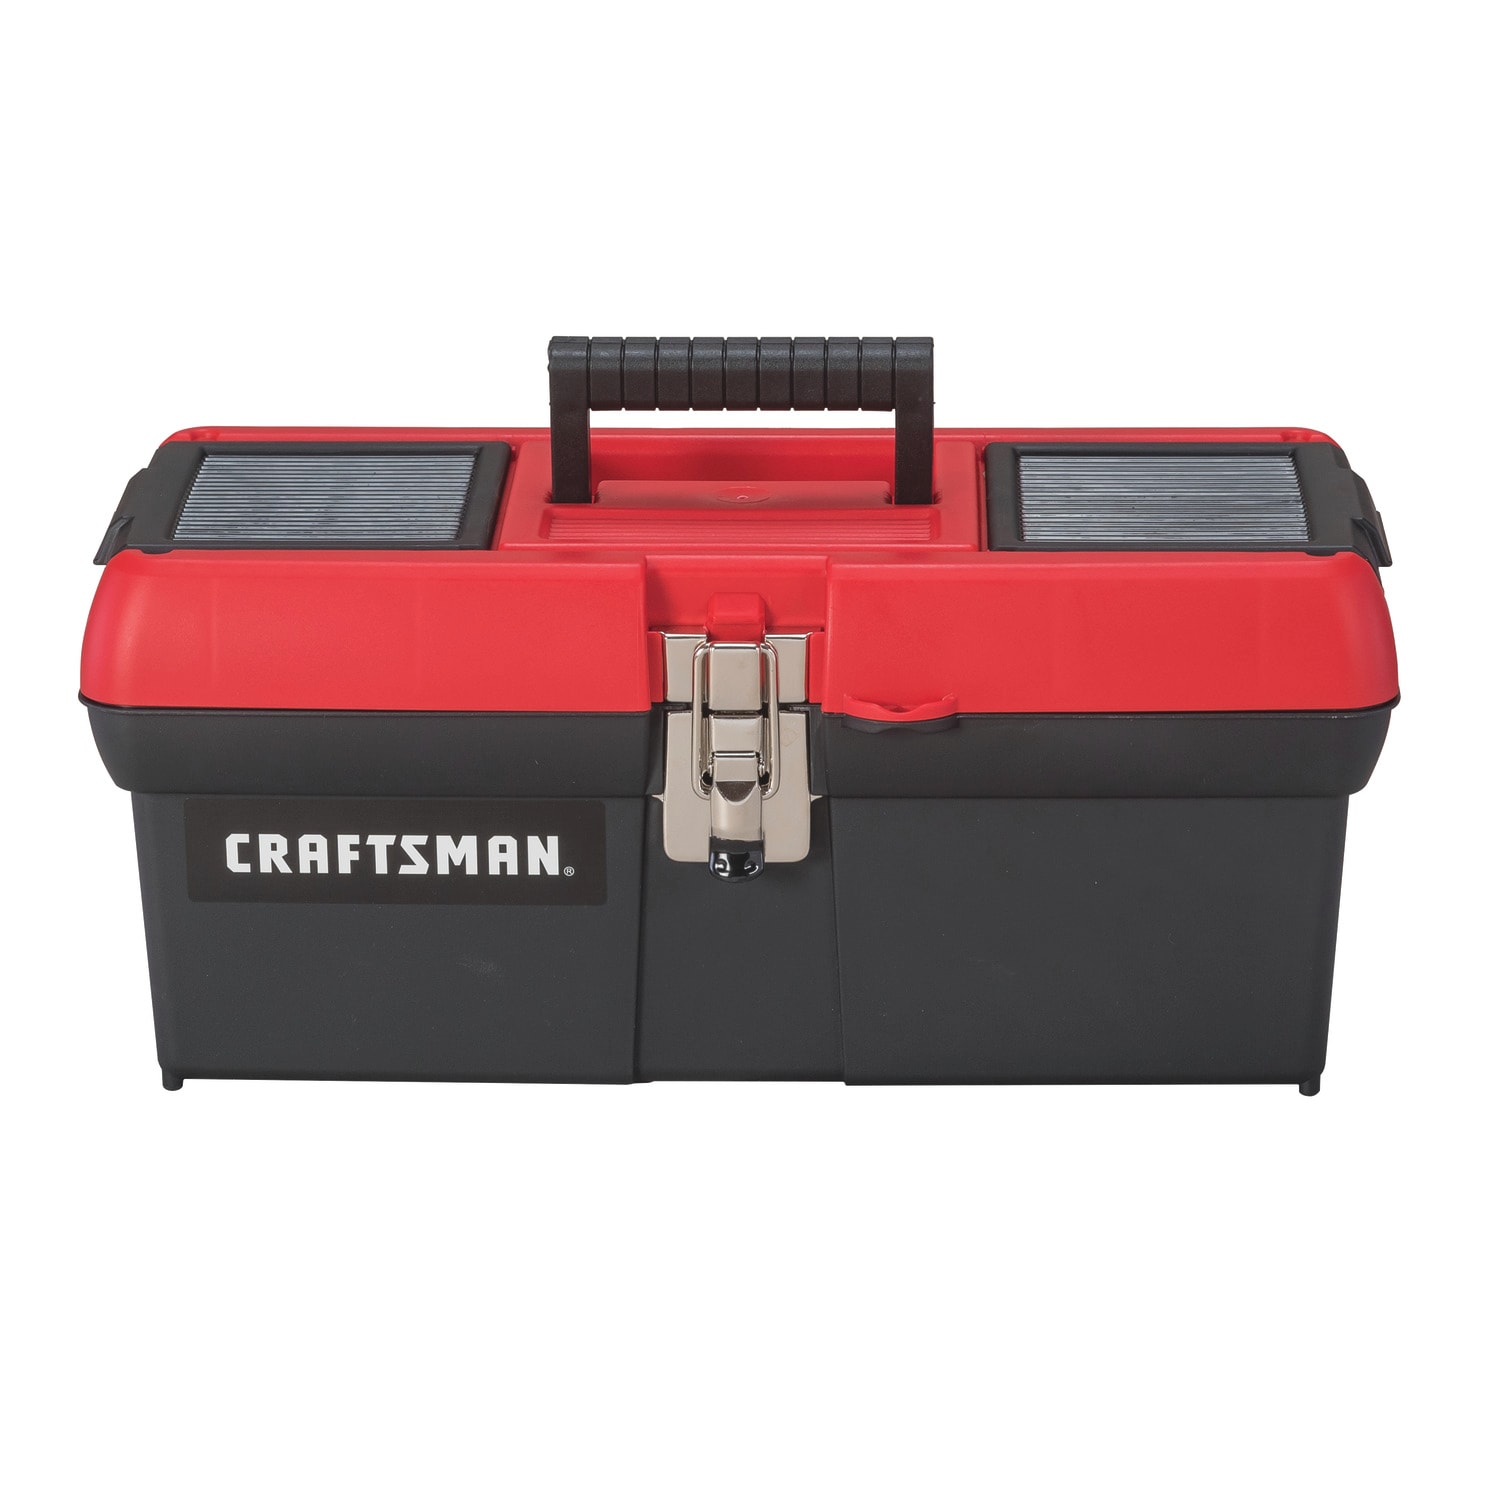 16" Plastic Tool Box Lockable Storage Carry Case Sturdy Strong Handle Tray DIY 